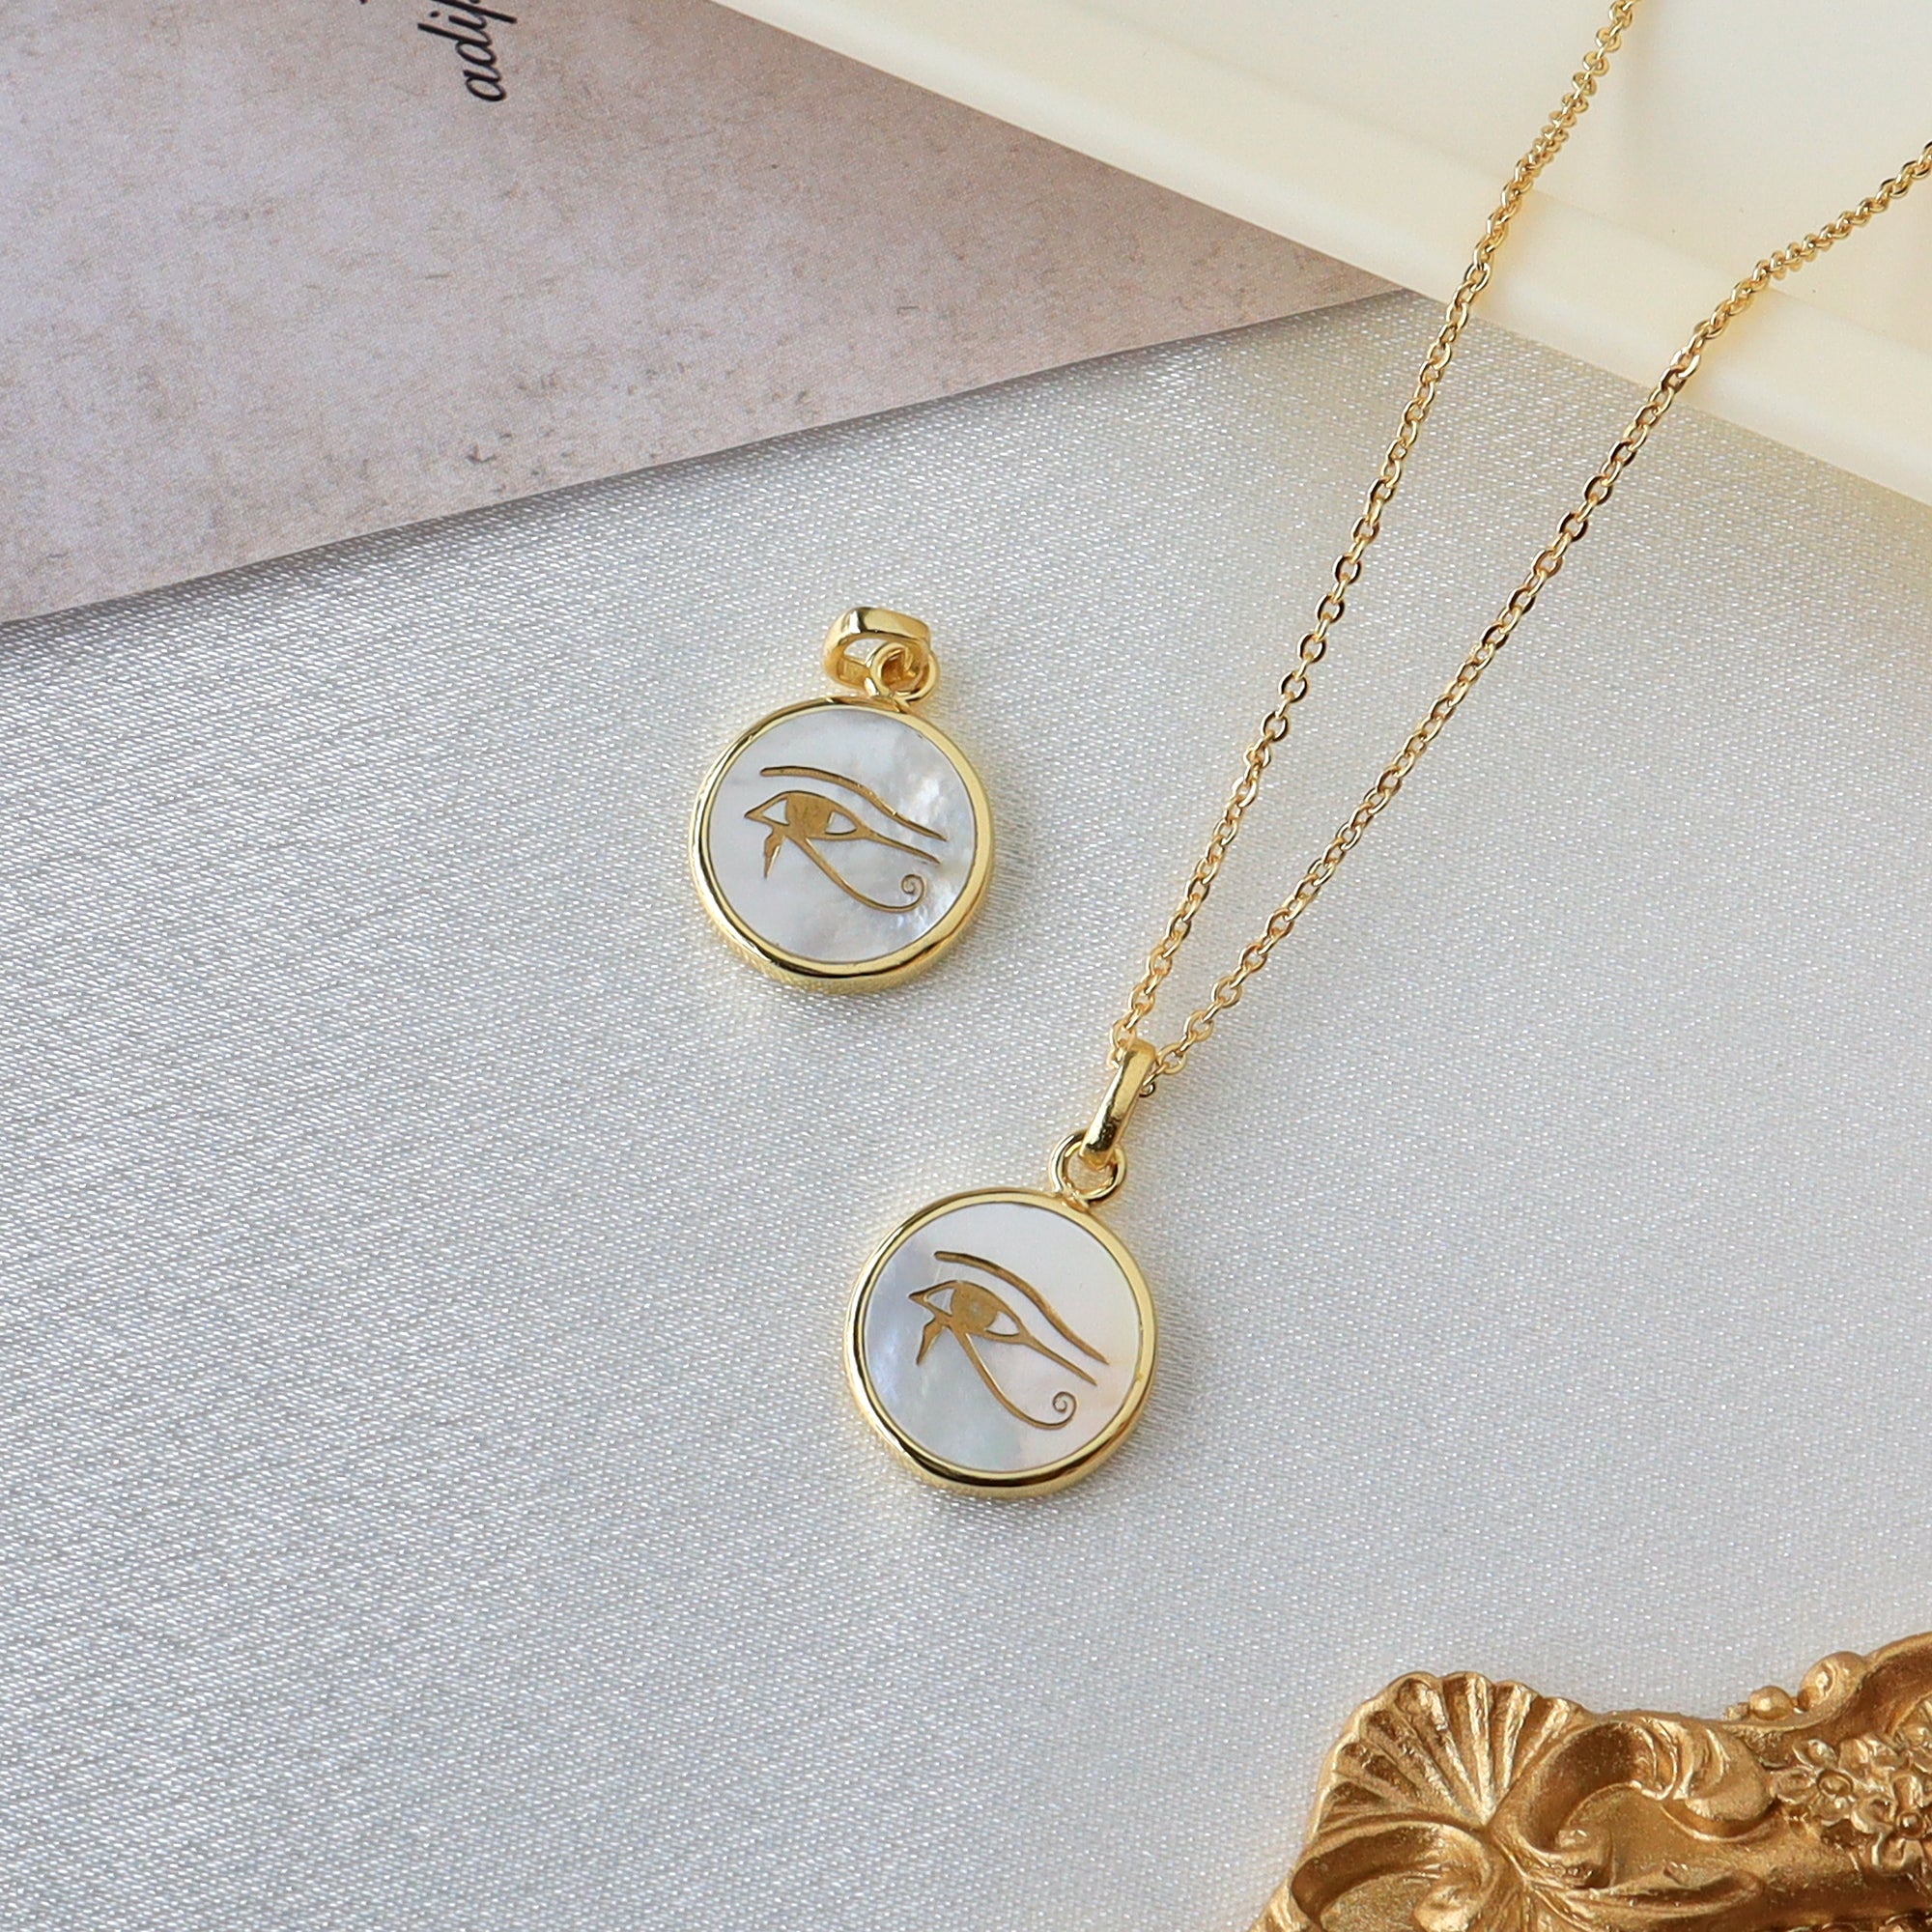 Wholesale Gold Plated Natural White Shell Pendant Necklace, Round Square Shape, Carved Eye, Shell Jewelry KZ006